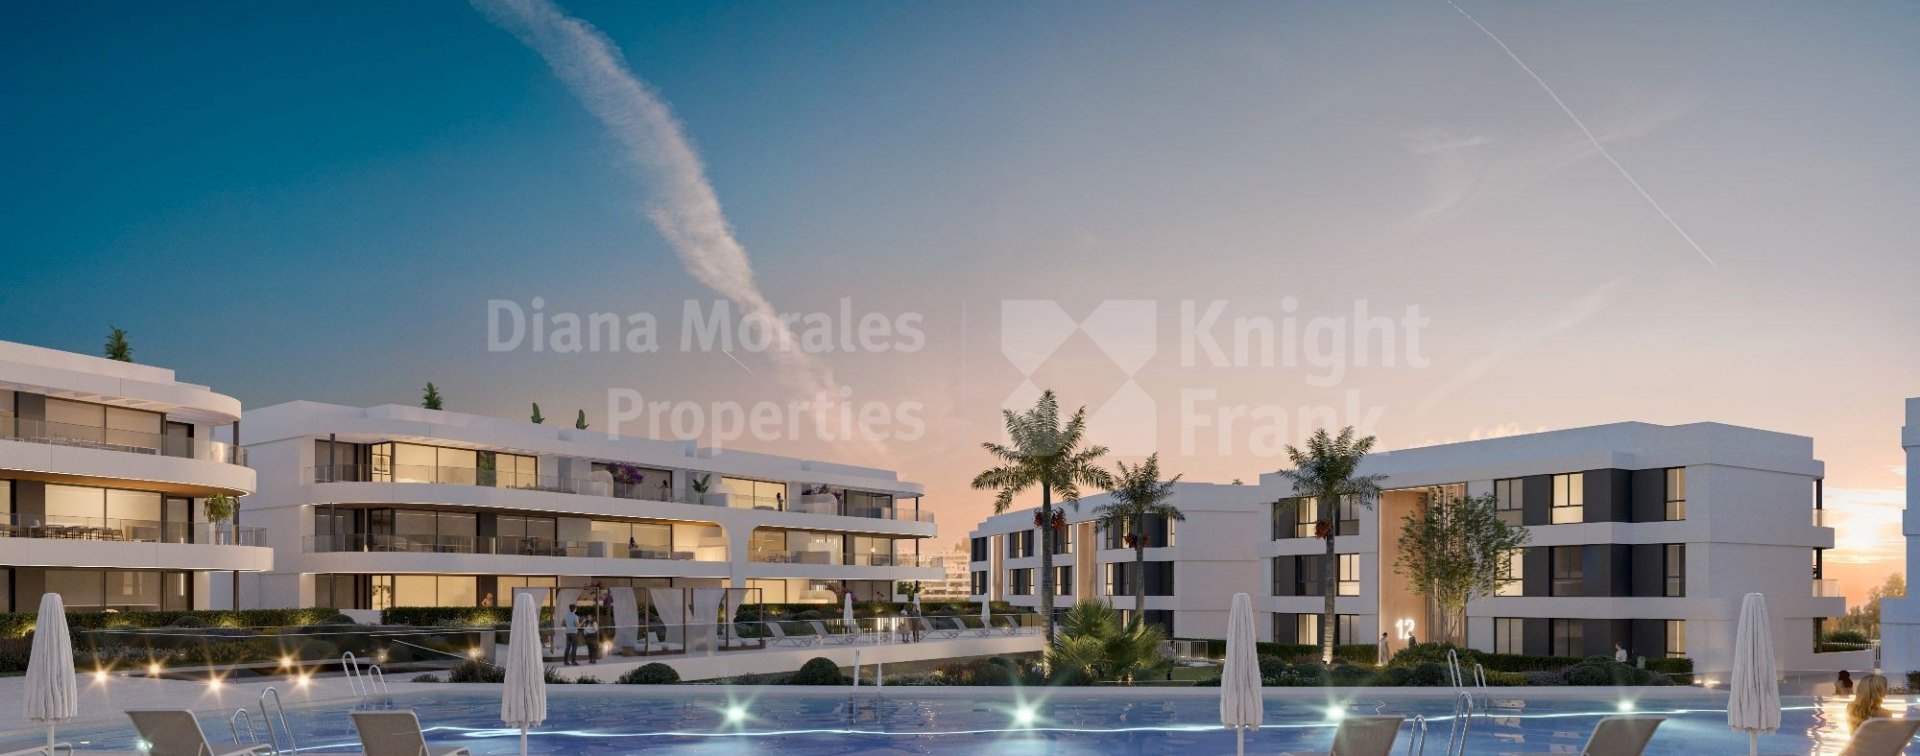 Atalaya, Three-bedroom penthouse in modern design complex in golf area